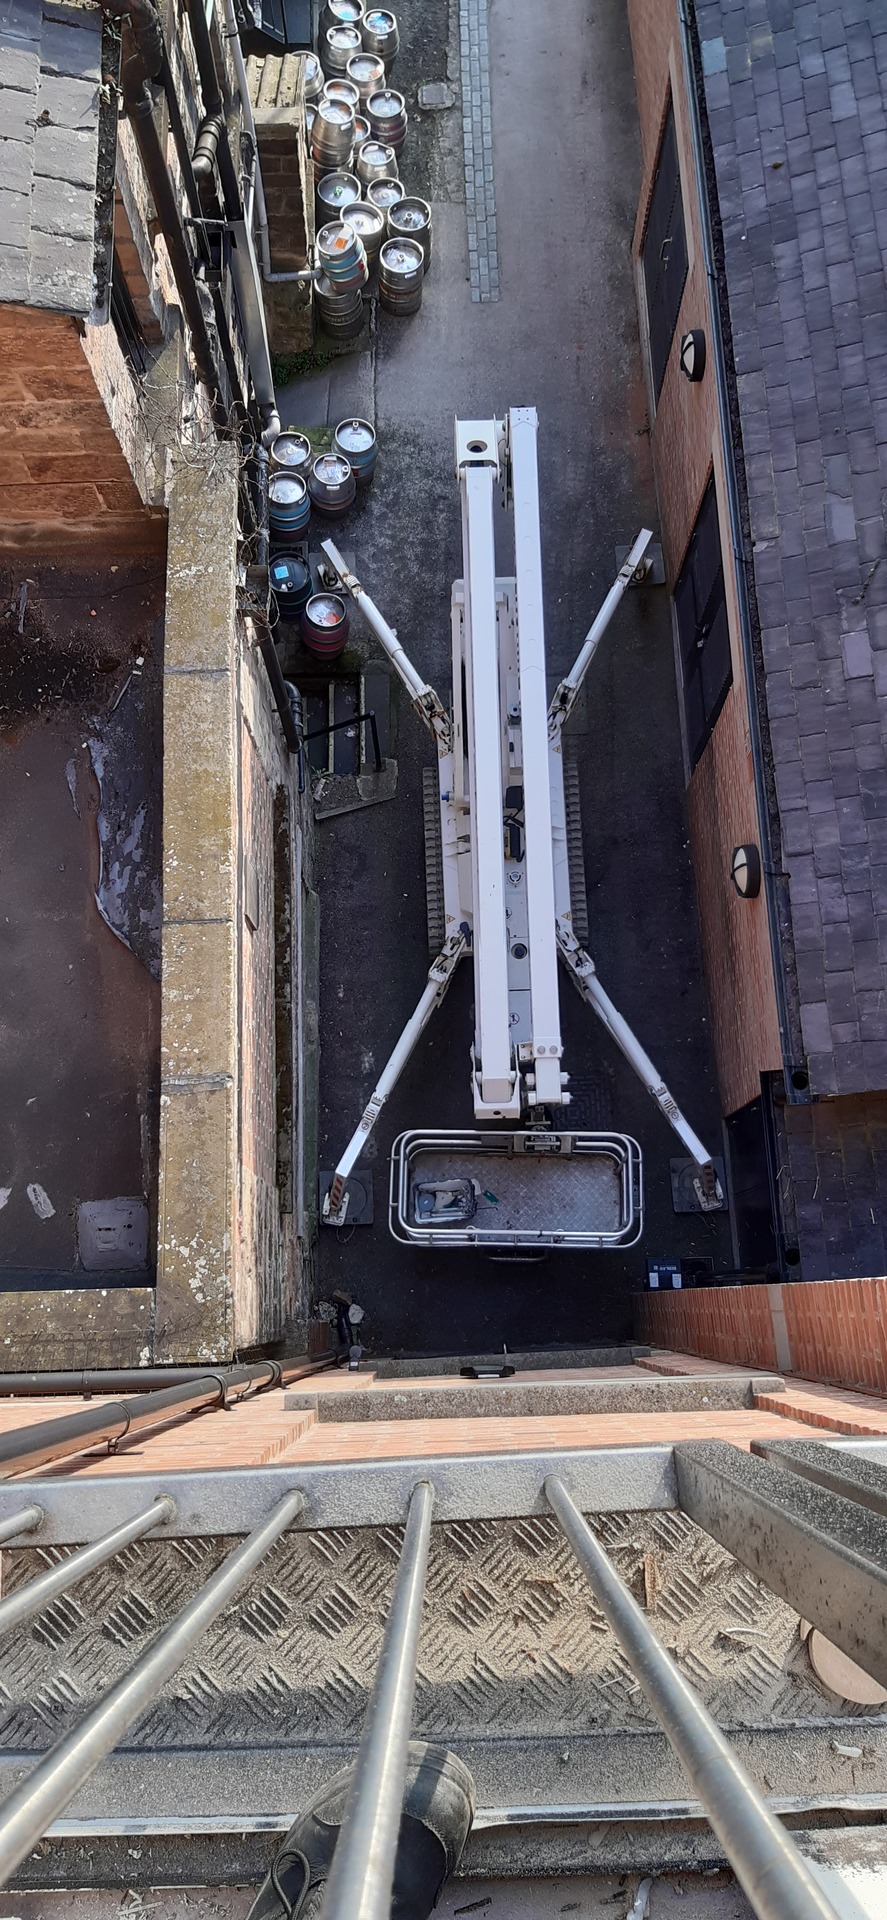 Selina, High Reaching Solutions 22m Lithium hybrid tracked spiderlift cherrypicker viewed from above, sited in a tight alleyway with her legs placed in the narrow setting, assisting with window repairs on a 5-story property in Harrogate, North Yorkshire.